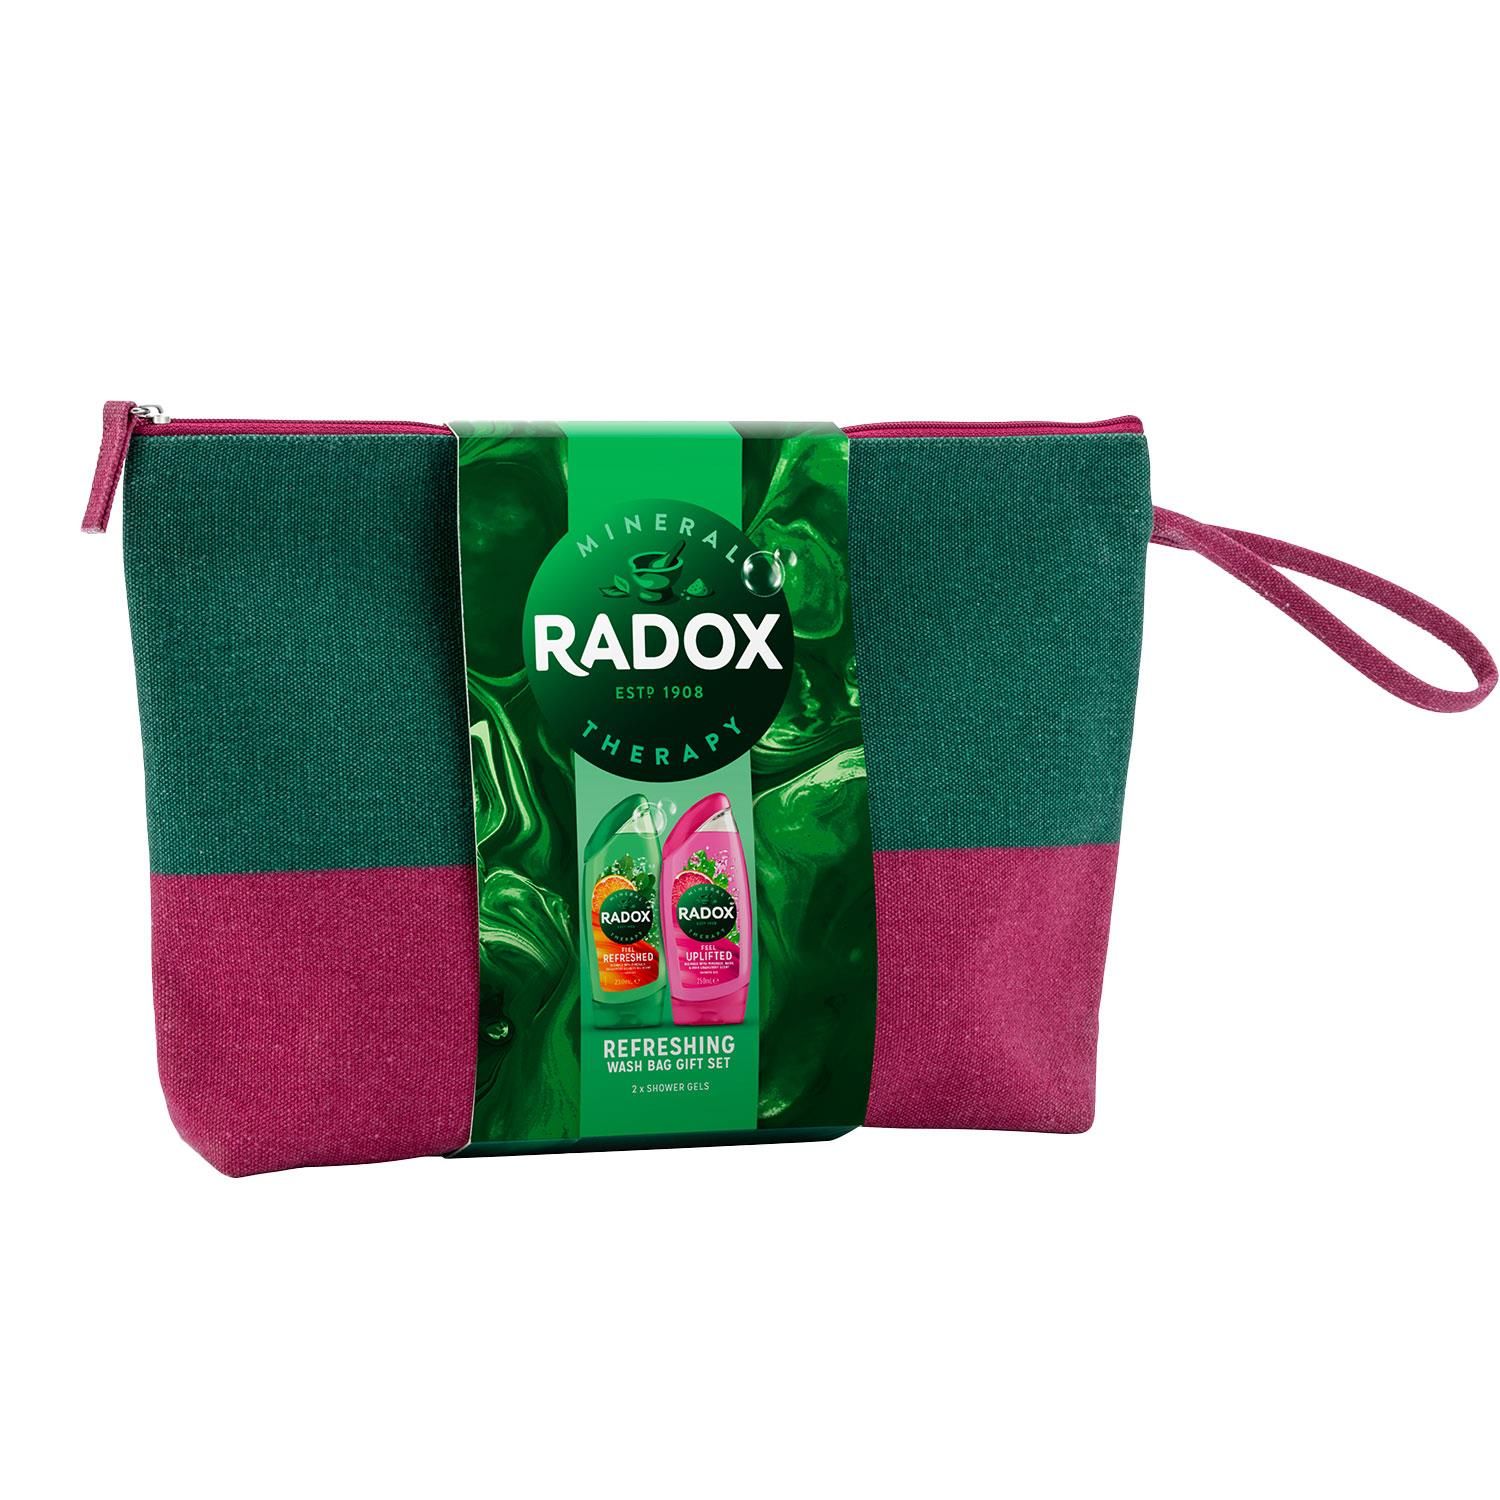 Radox Refreshing Wash Bag Gift Set Is it even Christmas if you haven't got your hands on a Radox Refreshing Gift Set It's a tradition. One that means we can start the day fresh and keep feeling fresh all day long. One that means you're not struggling to find last-minute Christmas gifts year after year. And you can't go wrong with Radox Refreshing WashBag Gift Set, made up of Feel Uplifted Shower Gel 250ml and Feel Refreshed Shower Gel 250 ml. There'll be no need to fake happiness when unwraps this gift set. Trust us. That's why we've created the ultimate gift set packaged in a classy but modern wash bag to make fresh-feeling self anywhere. Radox Feel Uplifted Shower Gel contains the heavenly scent of basil mixed with the citrusy tang of grapefruit to make you feel delightfully uplifted. Leaves your skin feeling refreshed and cleansed. A refreshing shower gel and cleanser. Radox Feel Refreshed Shower Gel transforms your mood and provides you with an invigorating shower experience when you need that energy boost to help you feel better. It contains natural ingredients chosen to help revitalize and invigorate your body and mind. 

Features: 
Full of natural herbs to provide the sensual stimulation you want, whether its relaxation, stimulation, muscle pain relief, Radox has the formulation for you. Combinations are specially designed to unleash a mood, whether you want to be ready or refreshed, uplifted or soothed. 
Radox Shower Gels are pH neutral and dermatologically tested. 
Suitable for all skin types. 

Safety Warnings: Avoid contact with eyes. In case of contact, rinse thoroughly with water. The product contains menthol. If you experience discomfort, please stop use. 

Gift Set Includes: 1x Feel Uplifted Shower Gel 250ml 1x Feel Refreshed Shower Gel 250 ml 1x Waterproof Lining WashBag